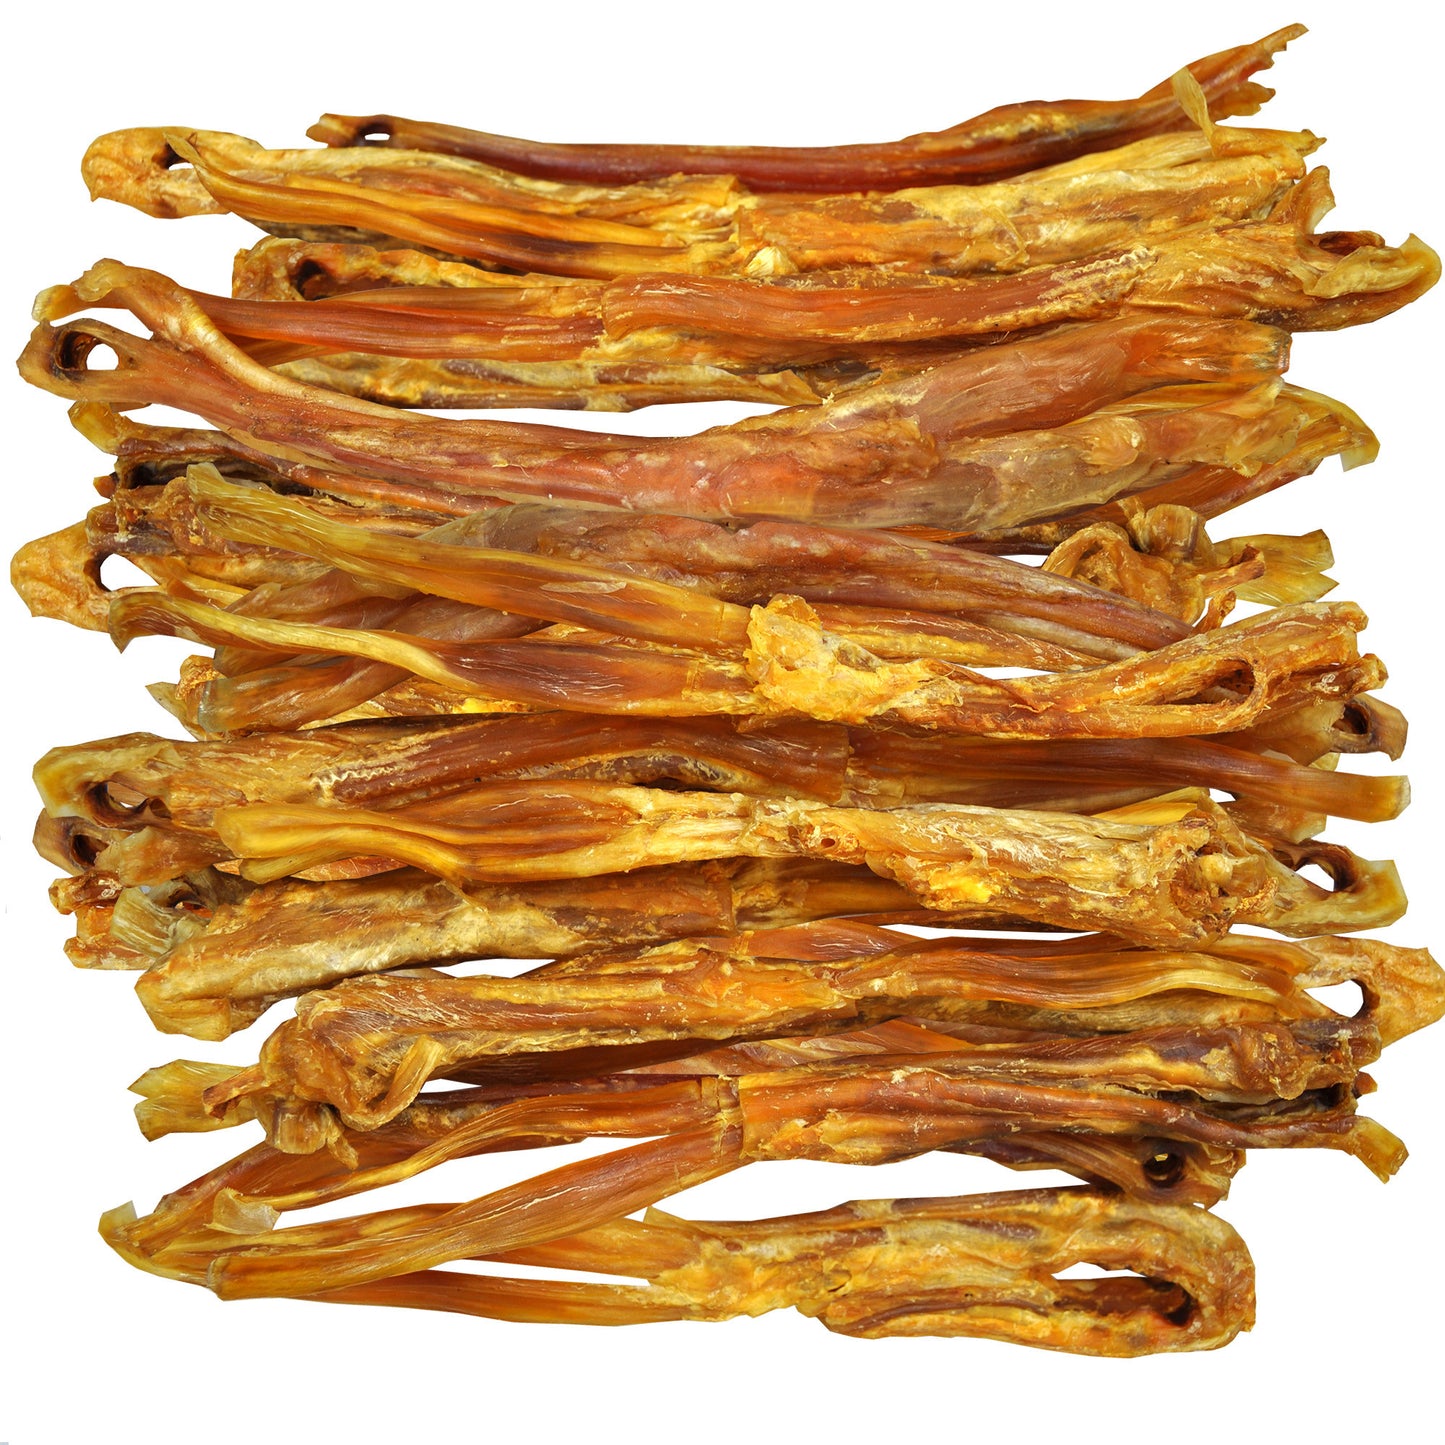 Beef Tendons - All Natural Healthy Dog Treats from Free Range Beef, 8" - 10" long